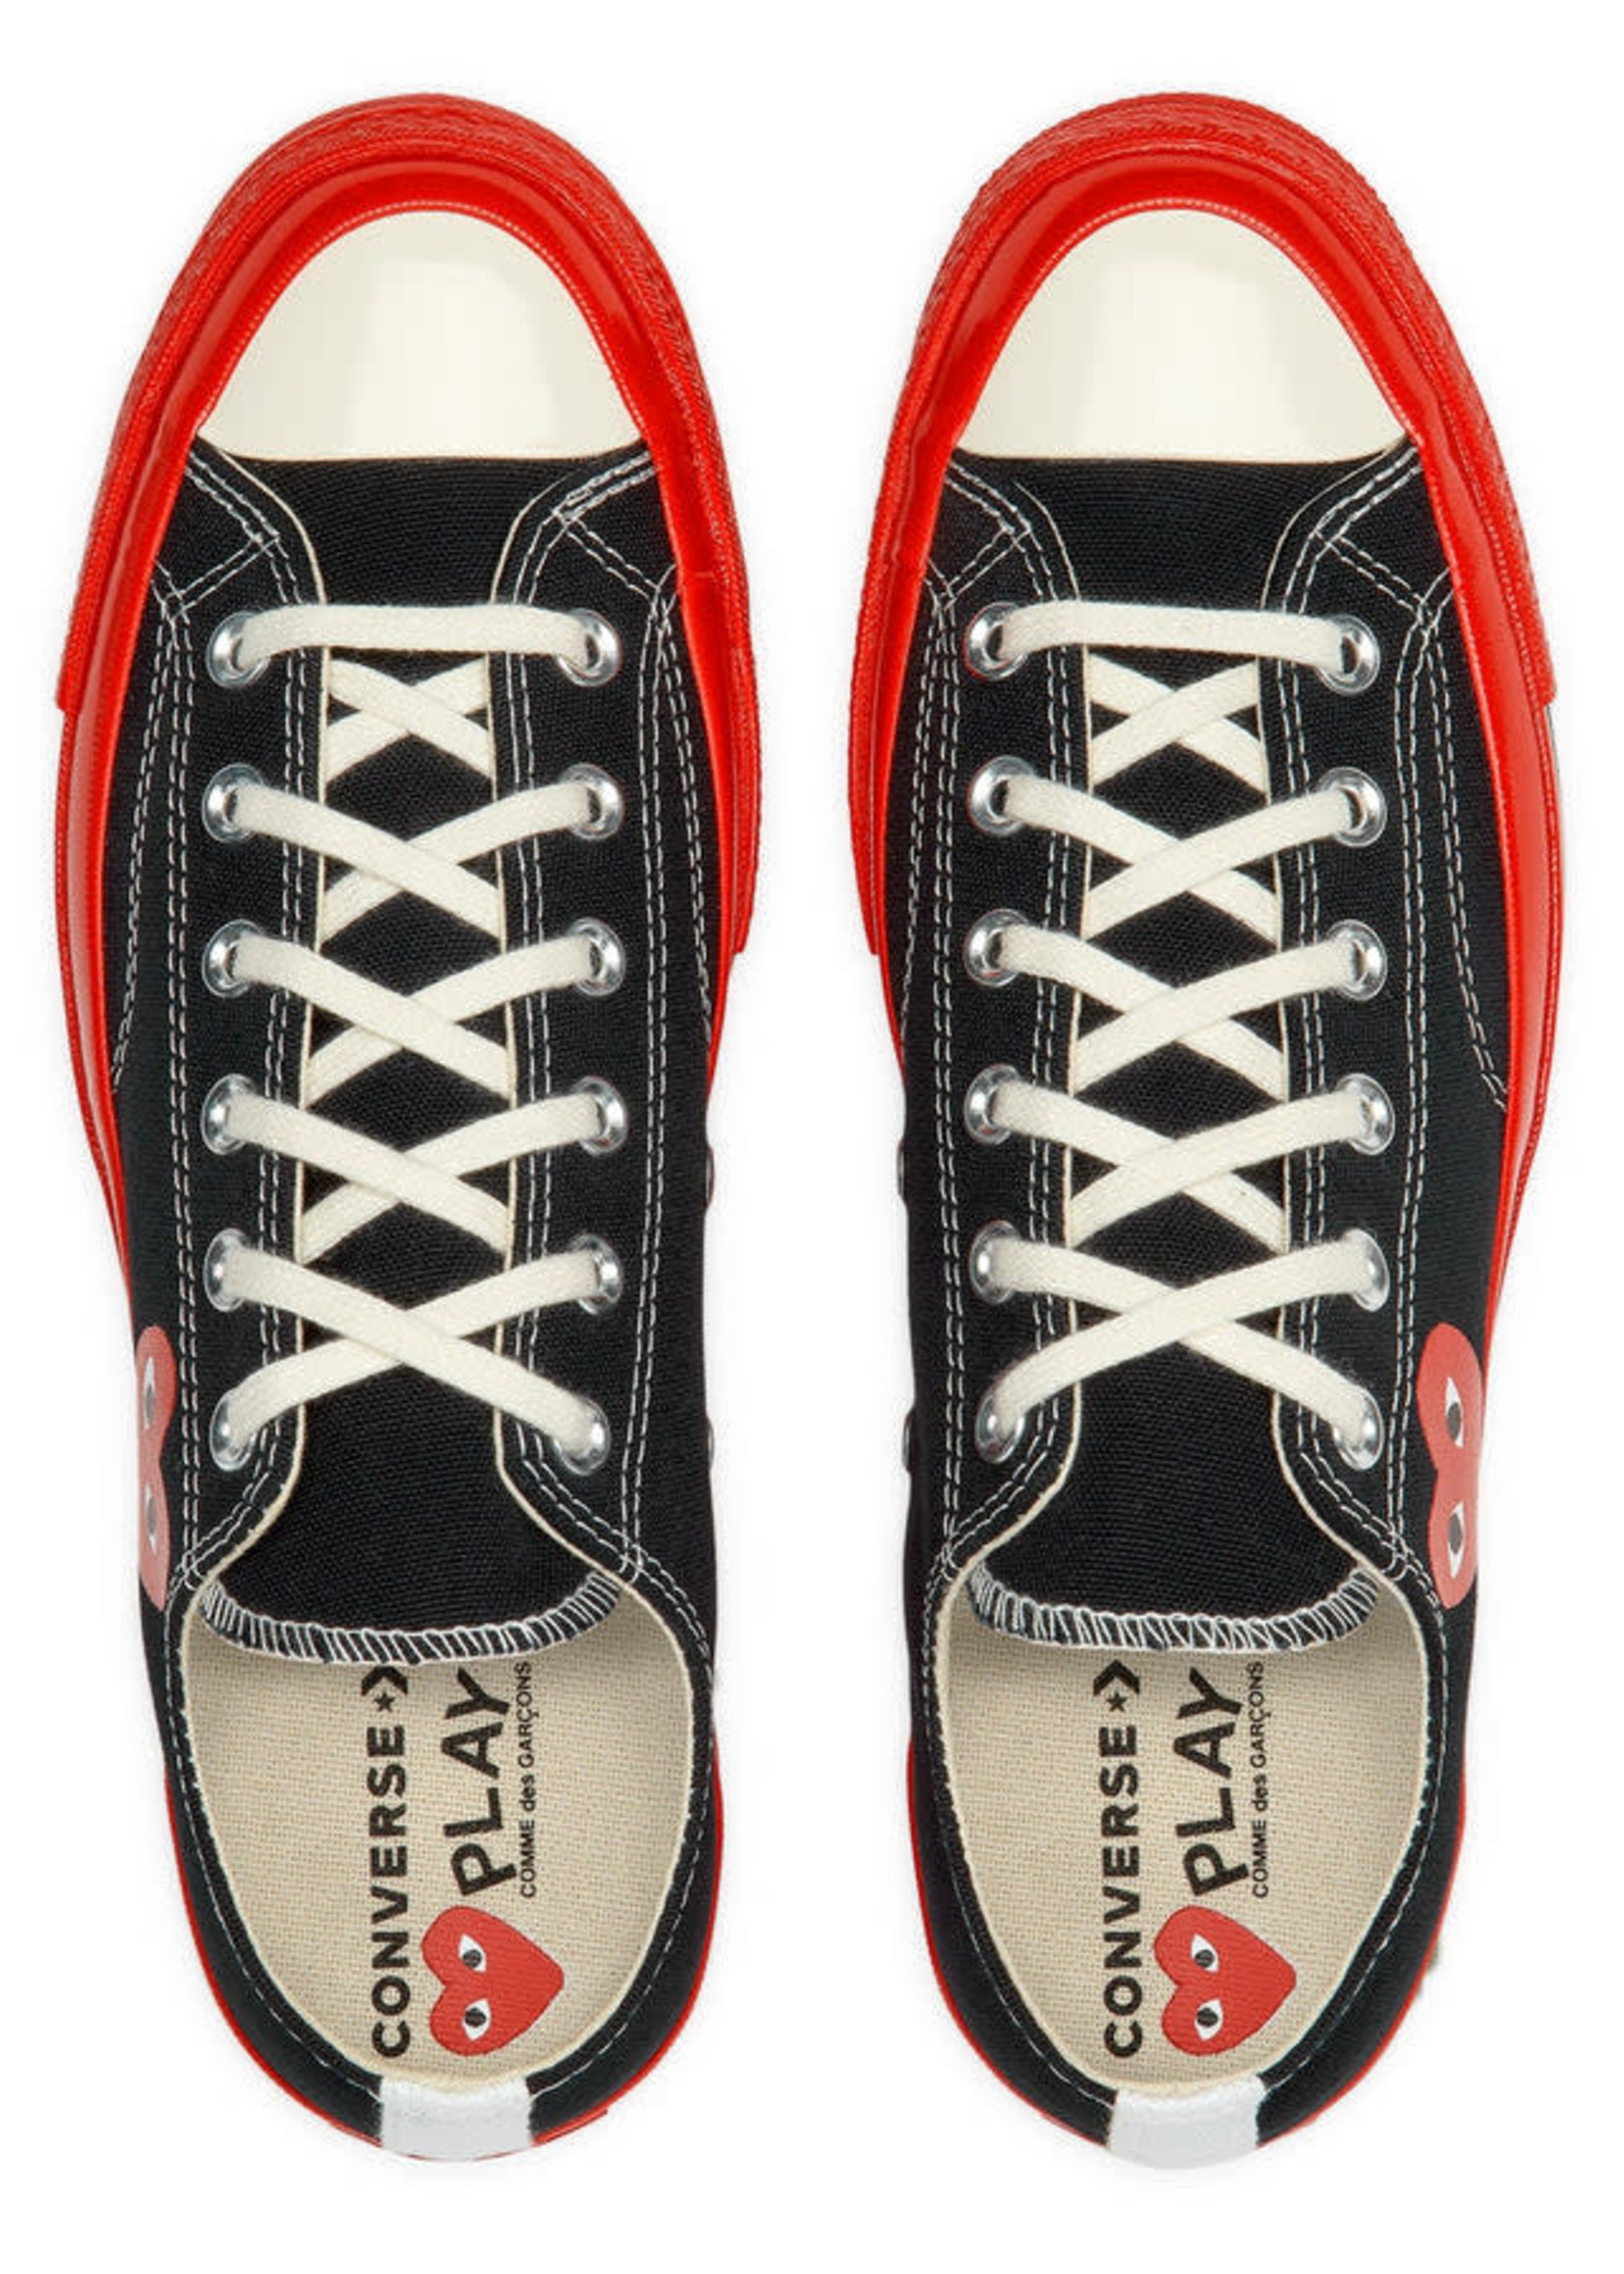 COMME des GARÇONS PLAY Converse Low Top Black and Red